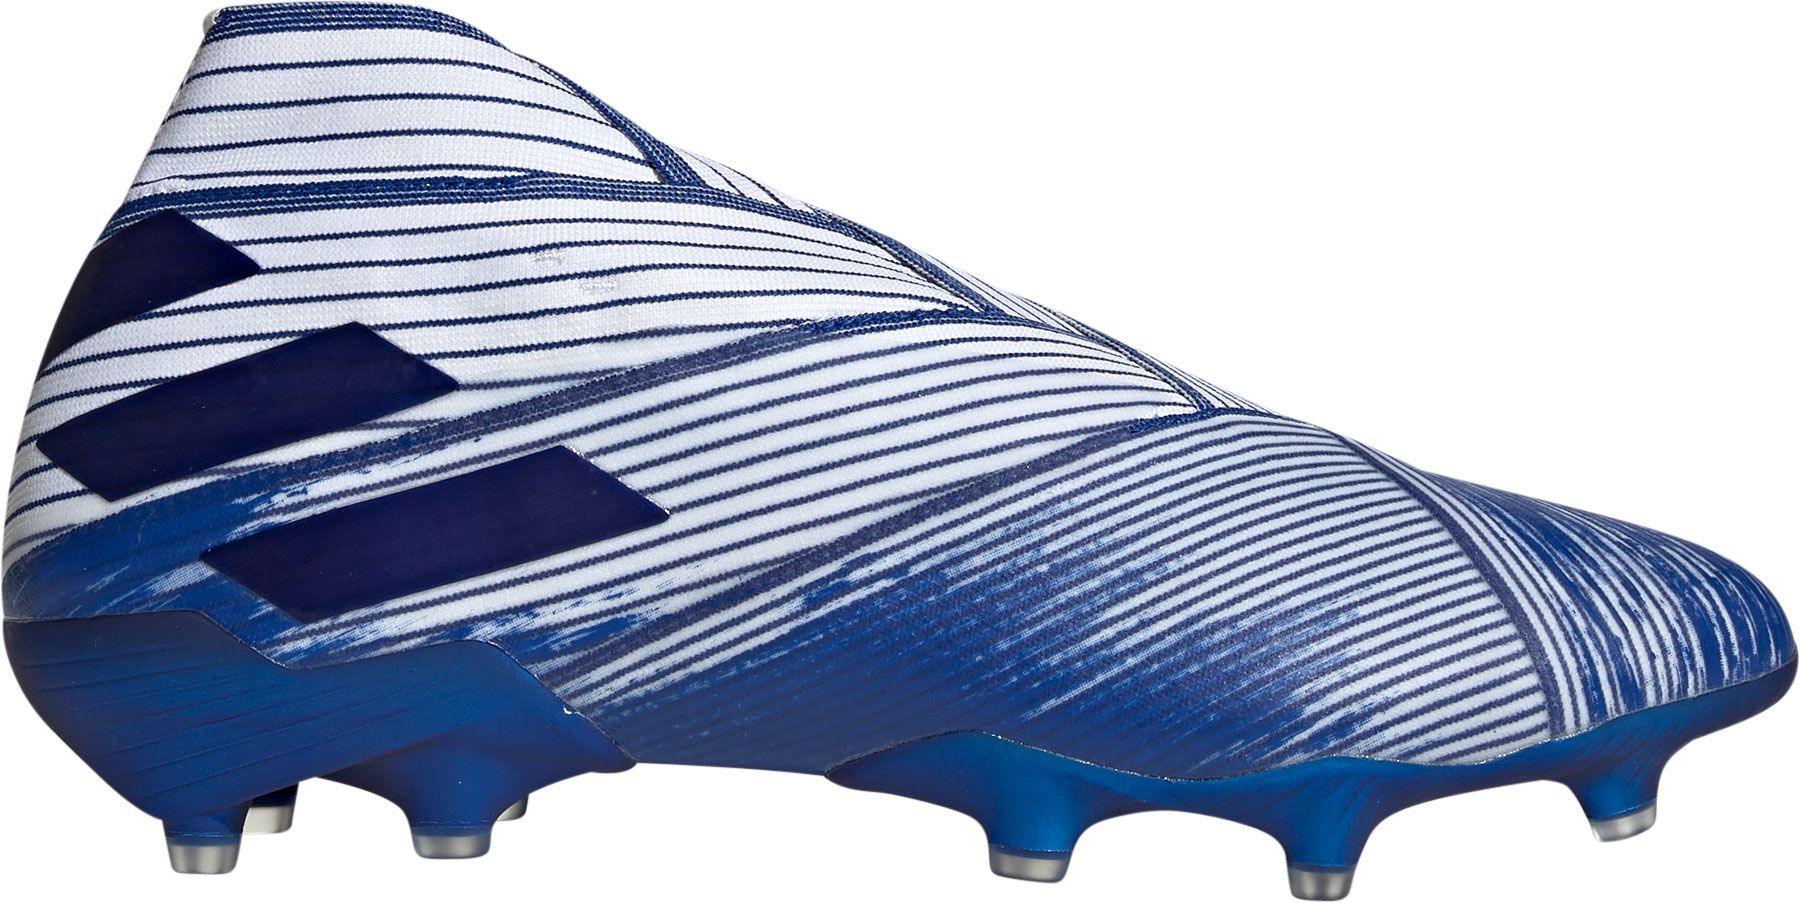 blue adidas soccer boots